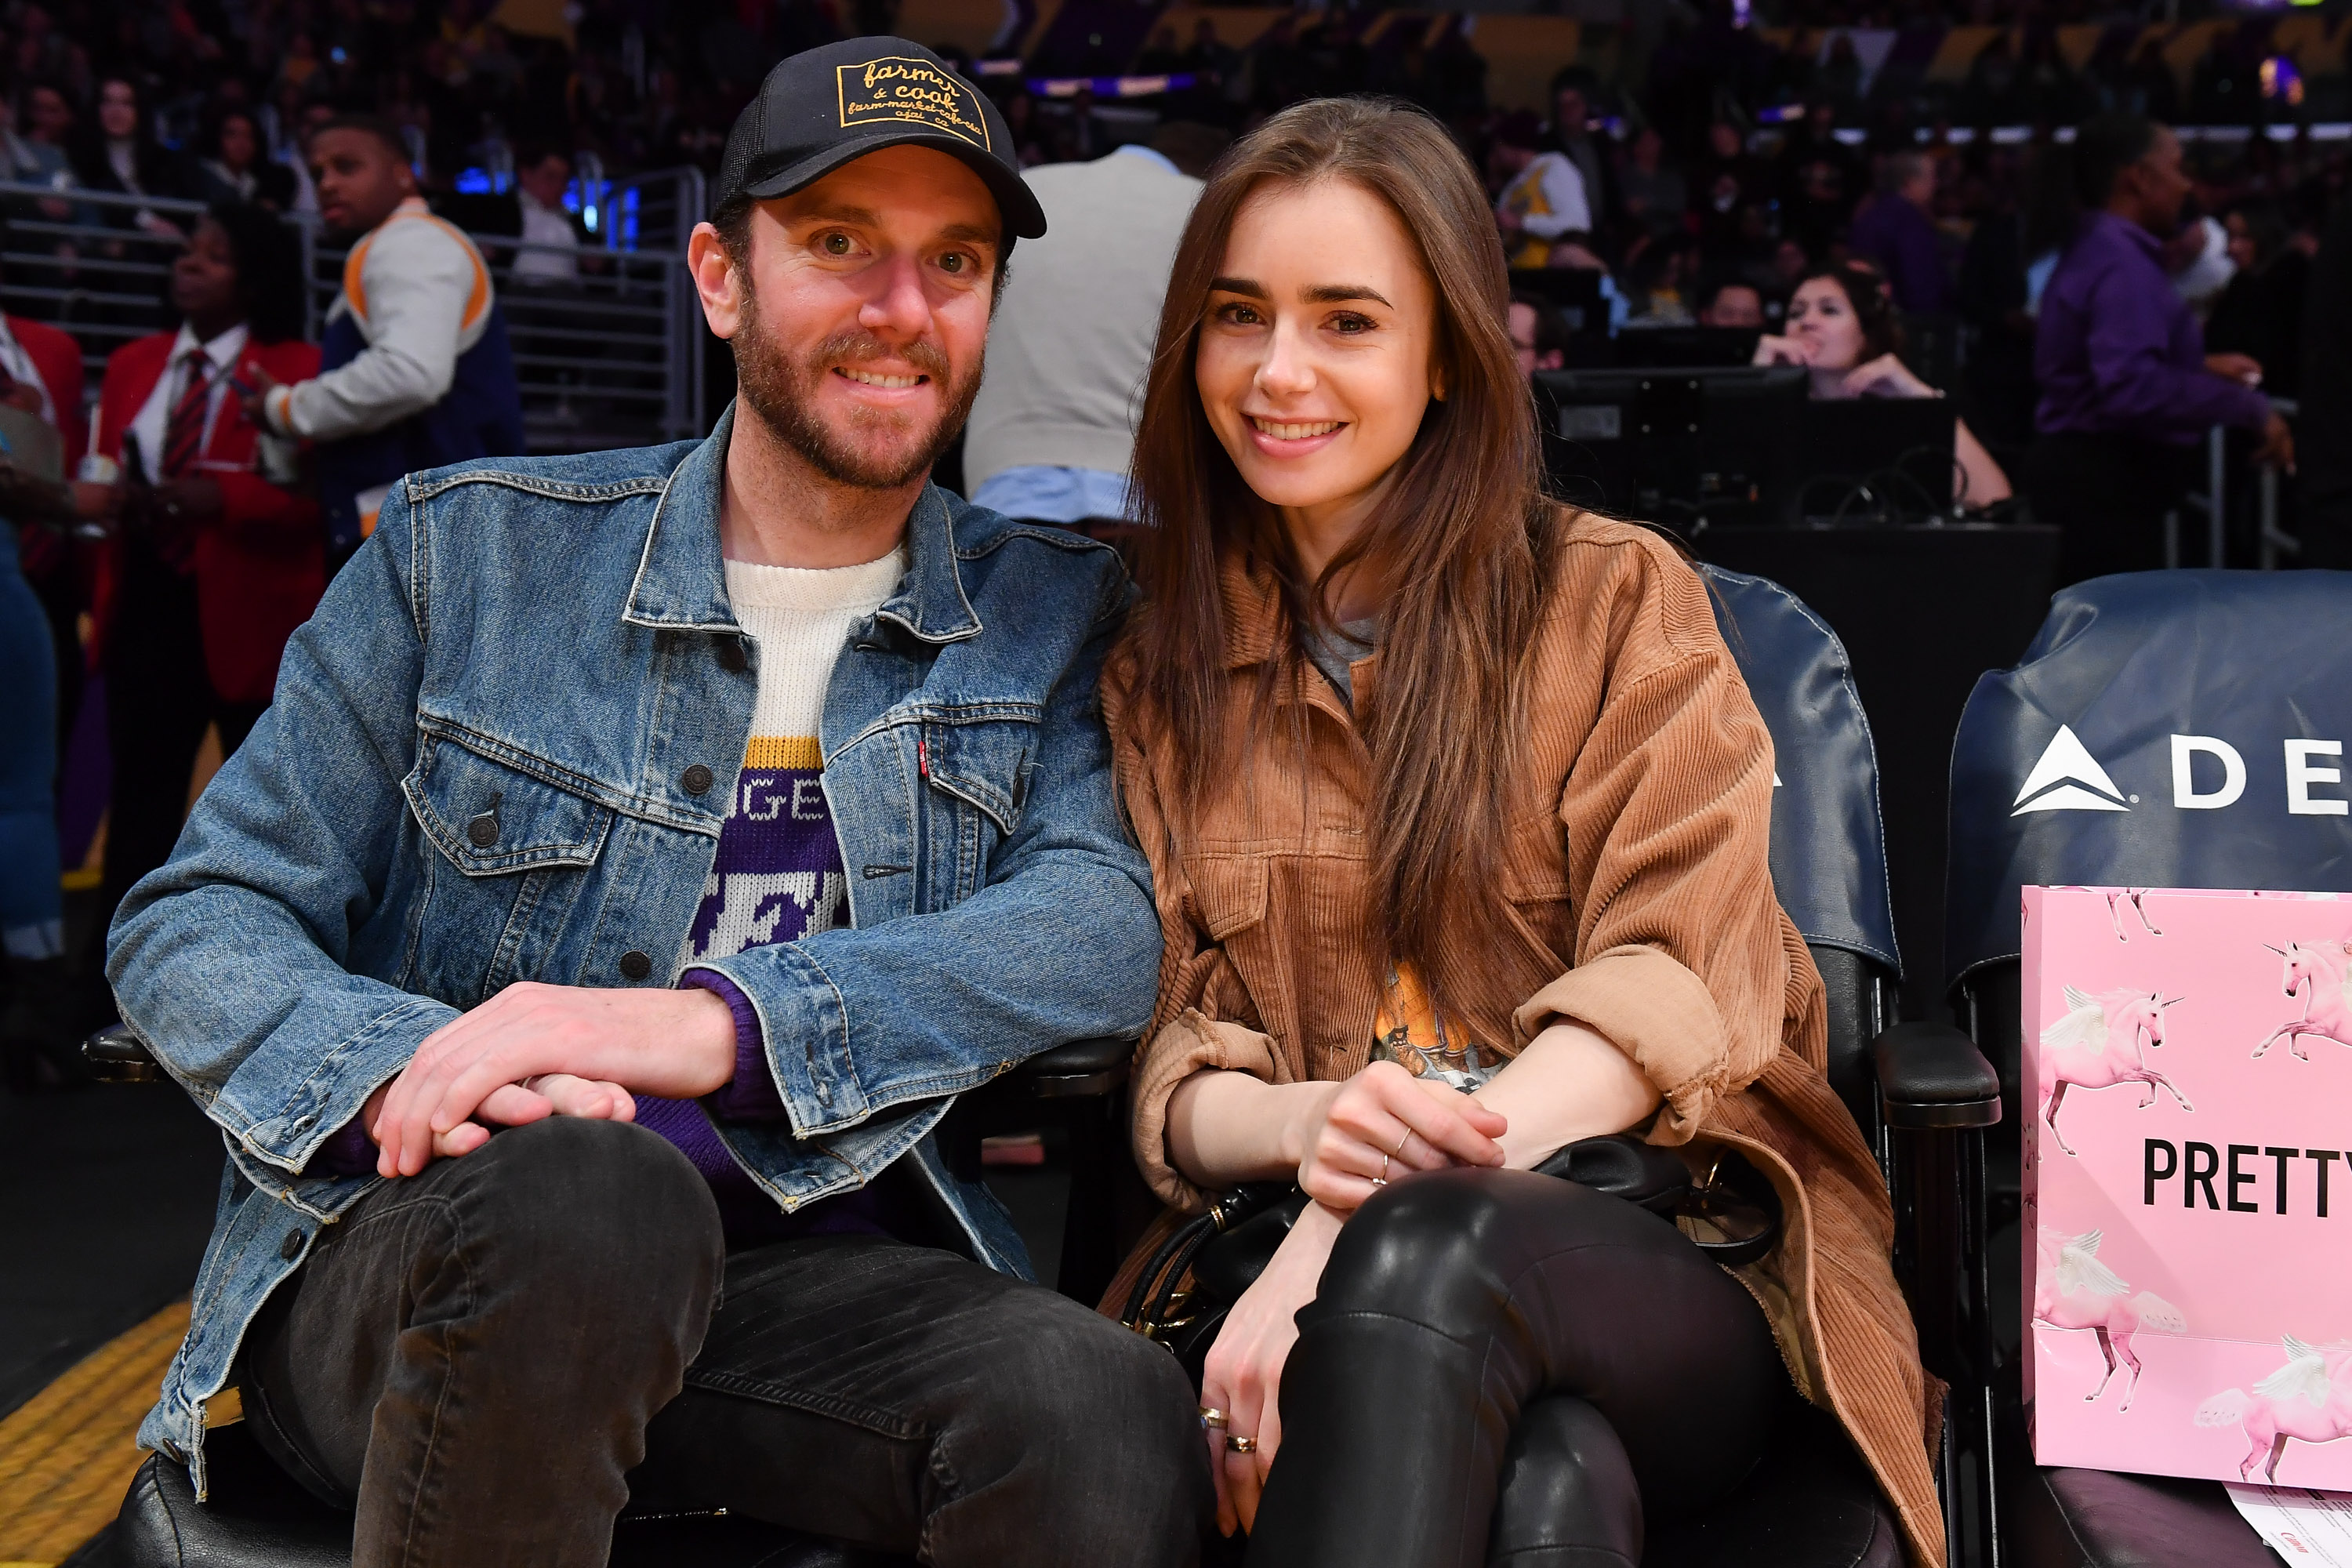 <p>Actress Lily Collins met filmmaker Charlie McDowell while working on the true-crime drama "Gilded Rage" in 2019. Lily acted in the movie while Charlie co-wrote and directed it. During an interview with The Mirror, the "Emily in Paris" actress chatted about their romance and how she knew early on that he was her person. "It was one of those situations where I knew the second I met him that I wanted to be his wife one day. So it was just a matter of when, really," she said of their first meeting. In September 2020, Charlie proposed to the Golden Globe-nominated actress while vacationing in Arizona. They married in 2021.</p>